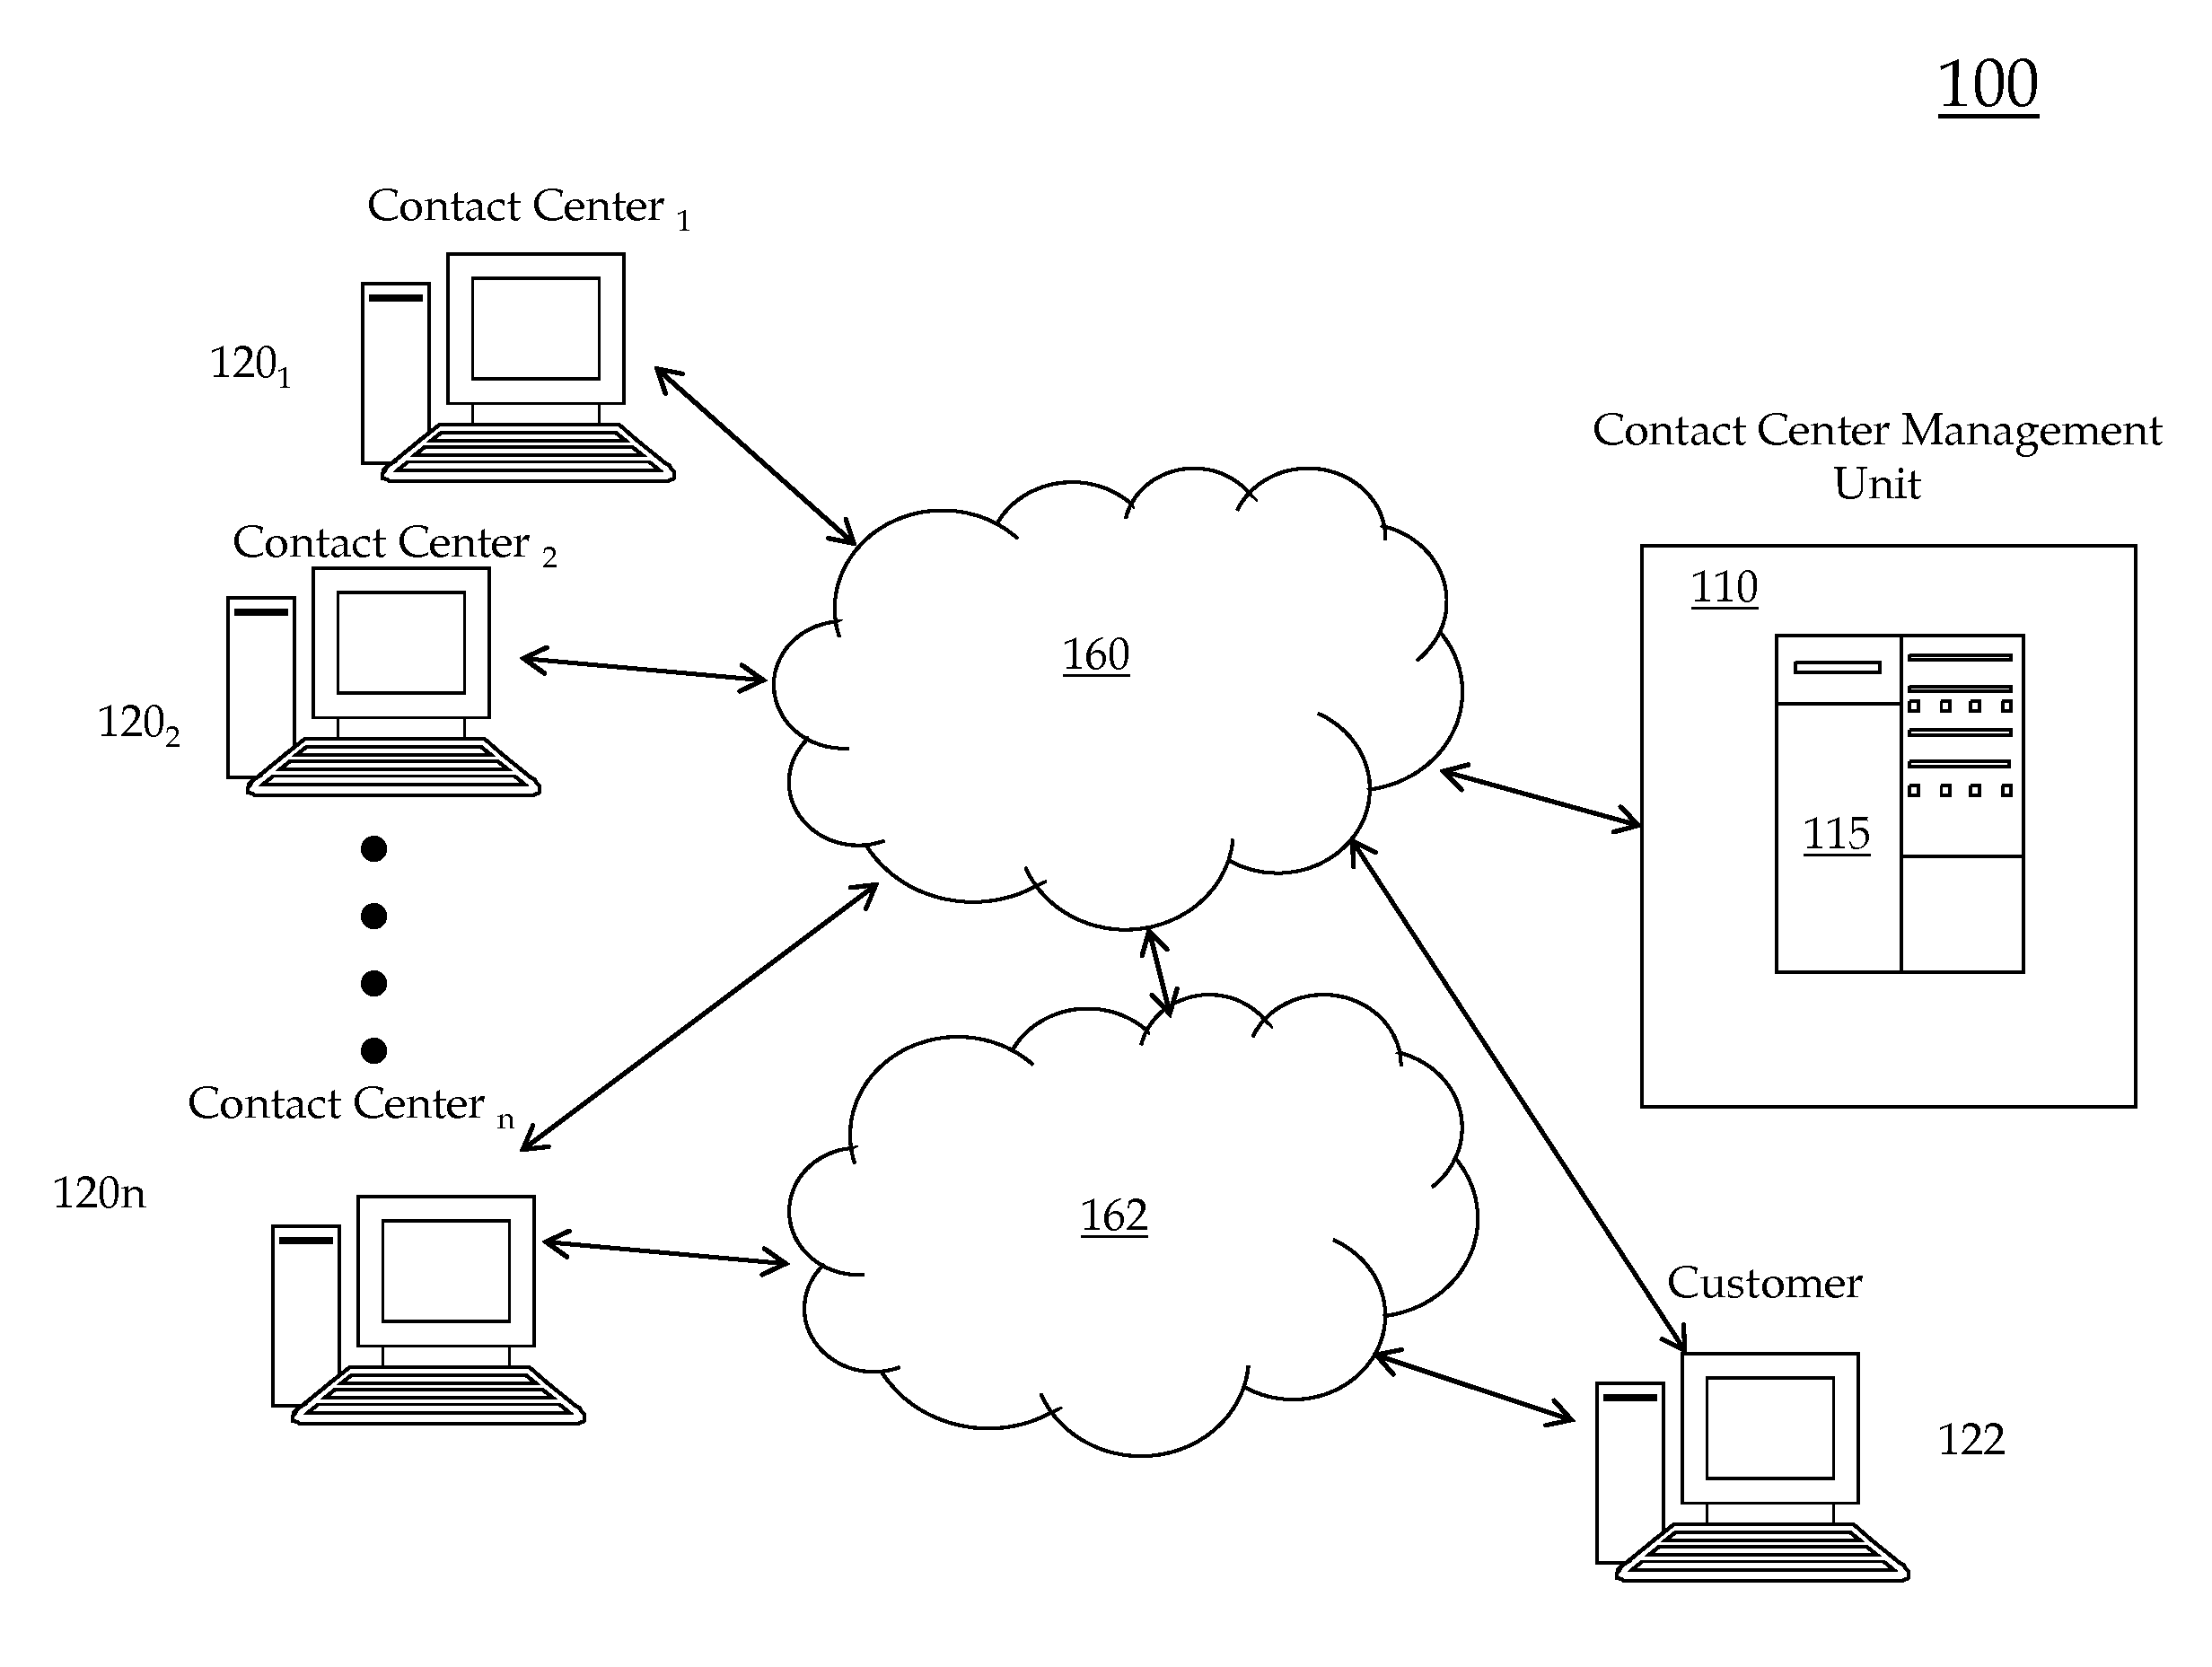 System and method for responding to changing conditions in contact centers